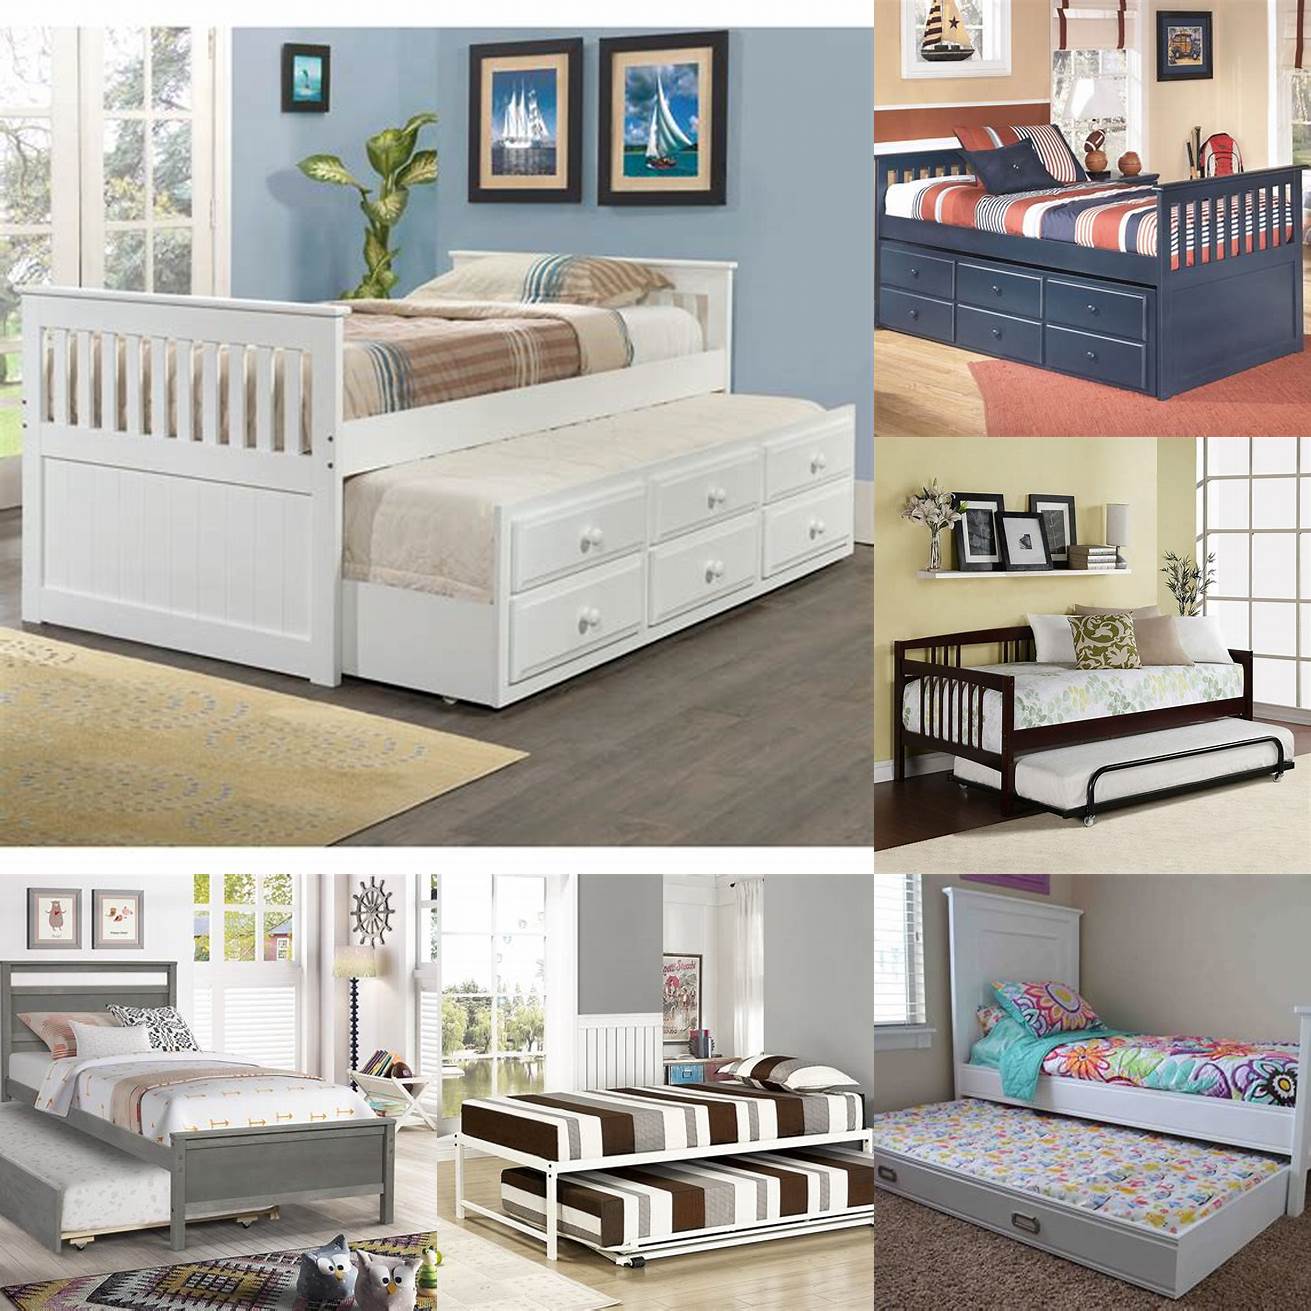 Standard twin beds with trundle This type of bed features a twin-size trundle bed that can fit under a twin-size bed frame It is the most common type of twin bed with trundle and is perfect for kids rooms or guest rooms